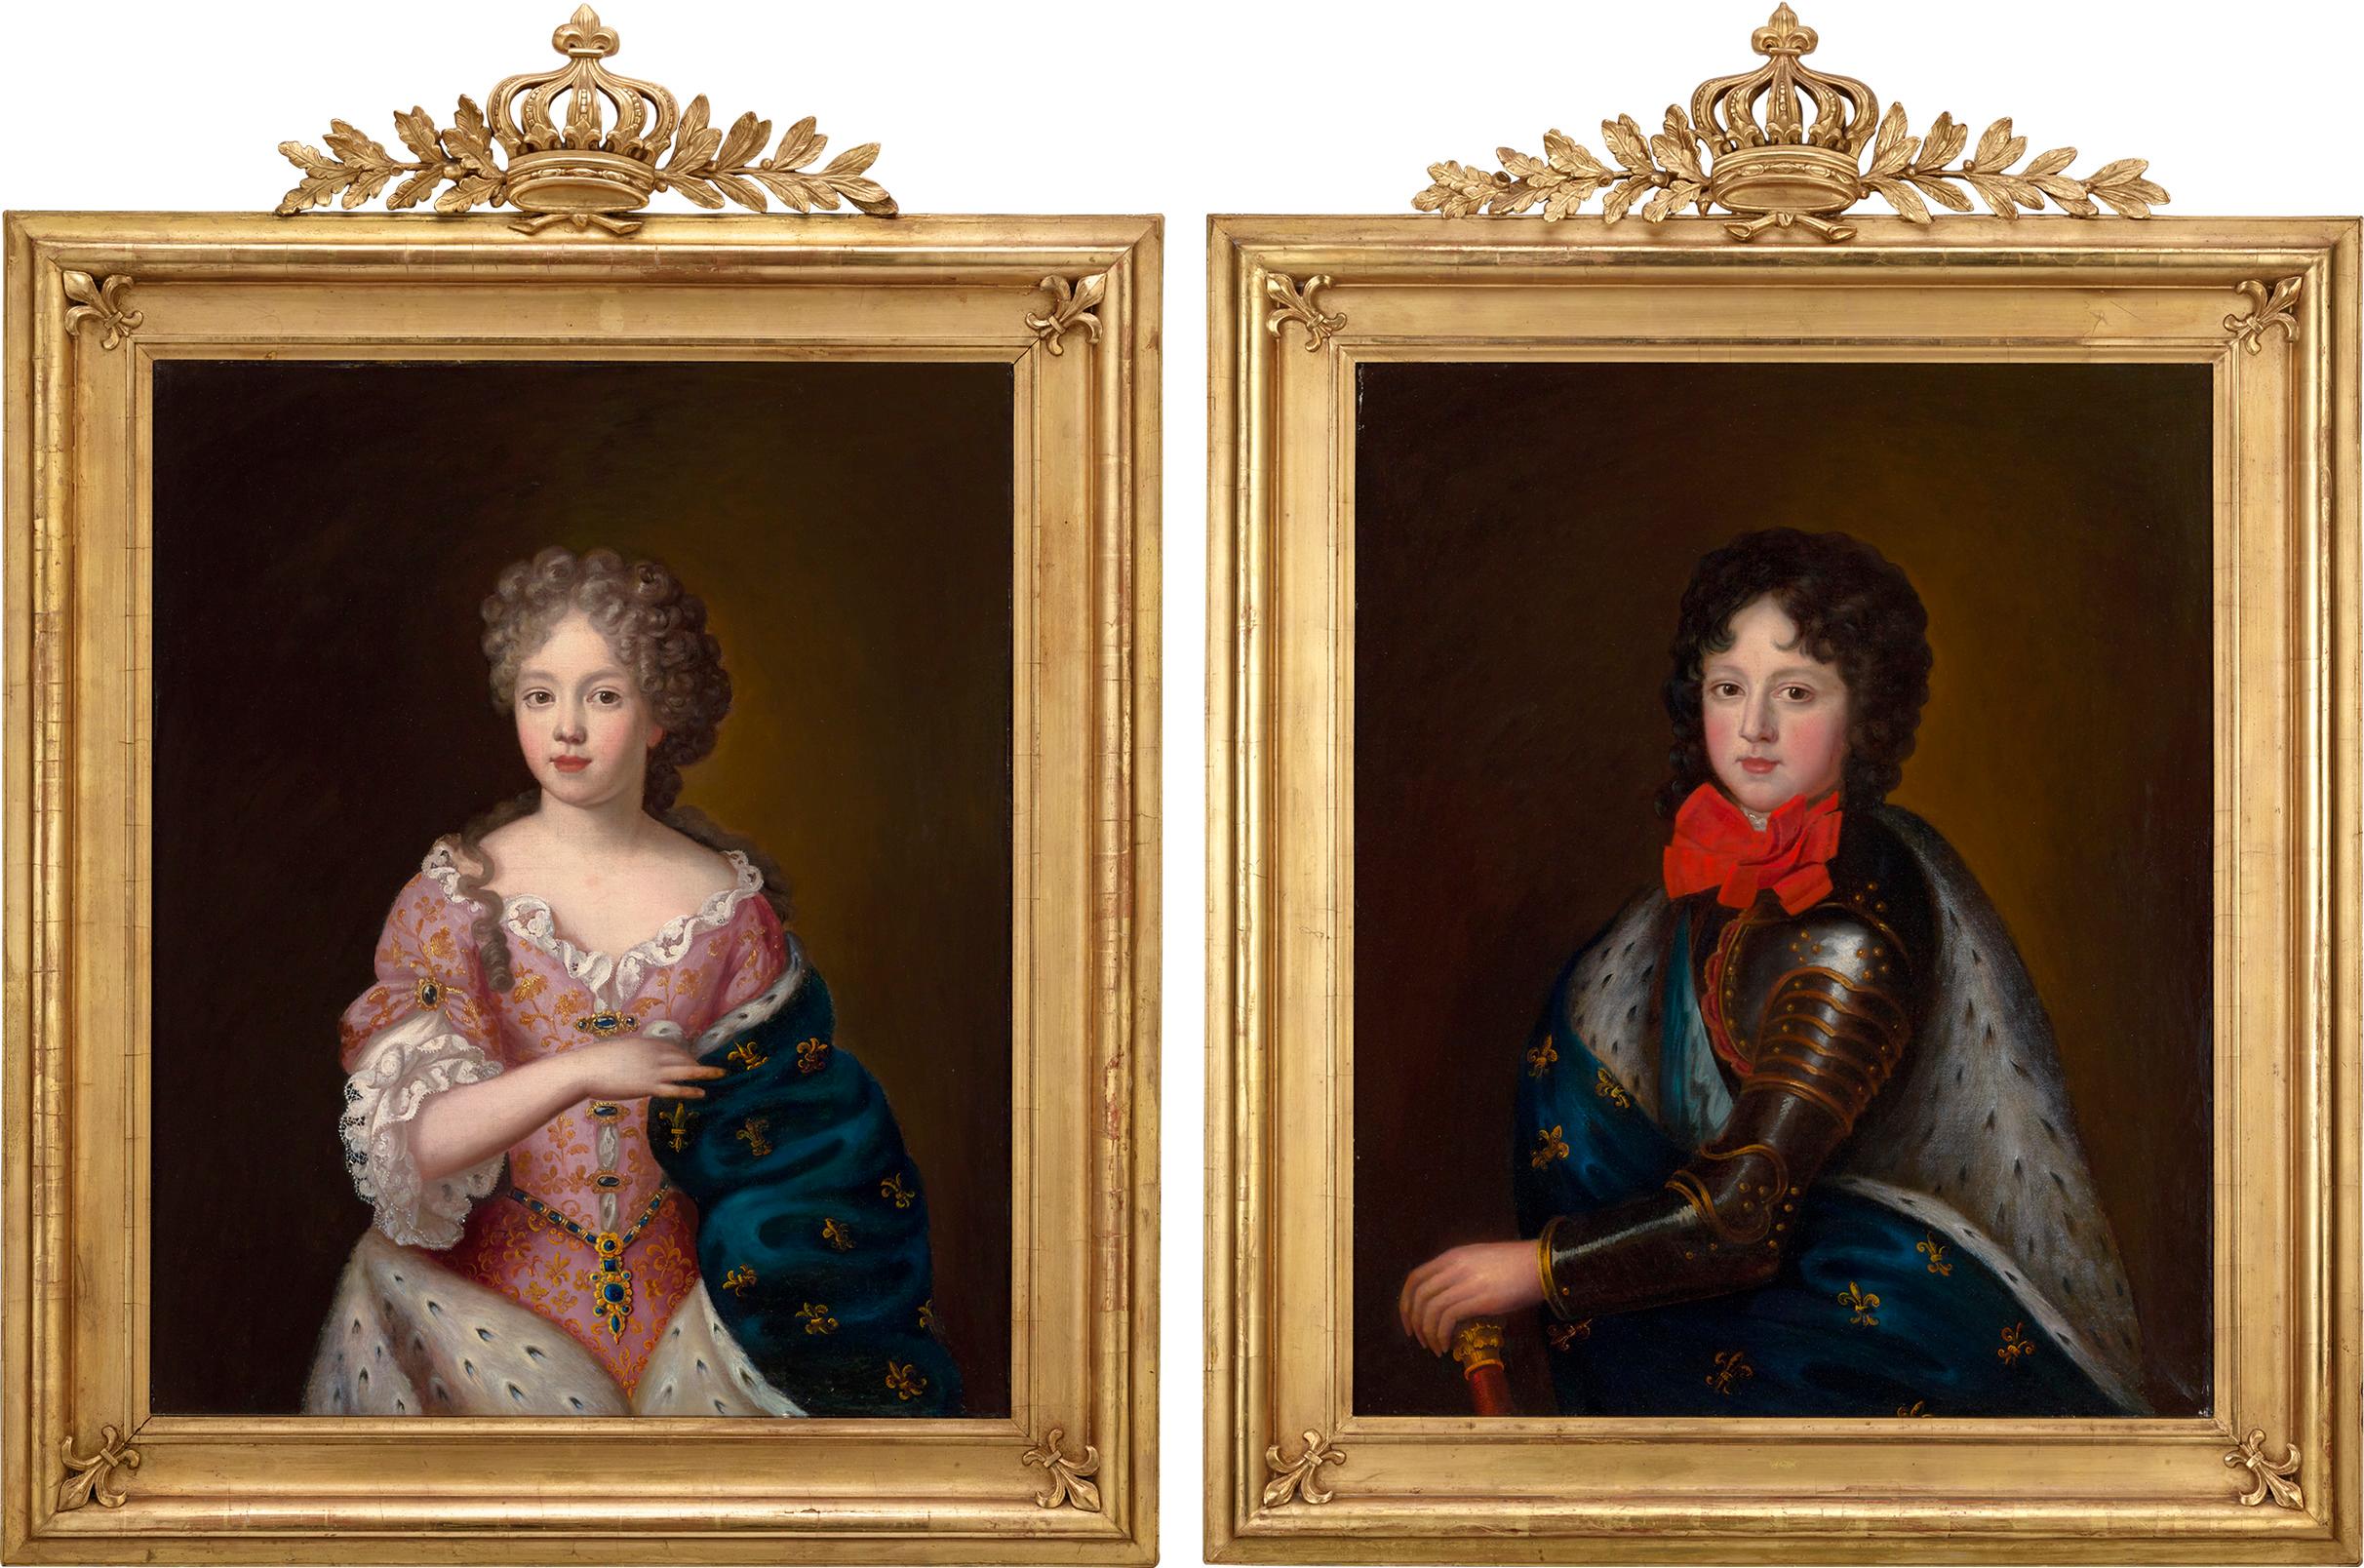 Pair of Royal Portraits of the Duke and Duchess of Burgundy - Painting by Pierre Gobert